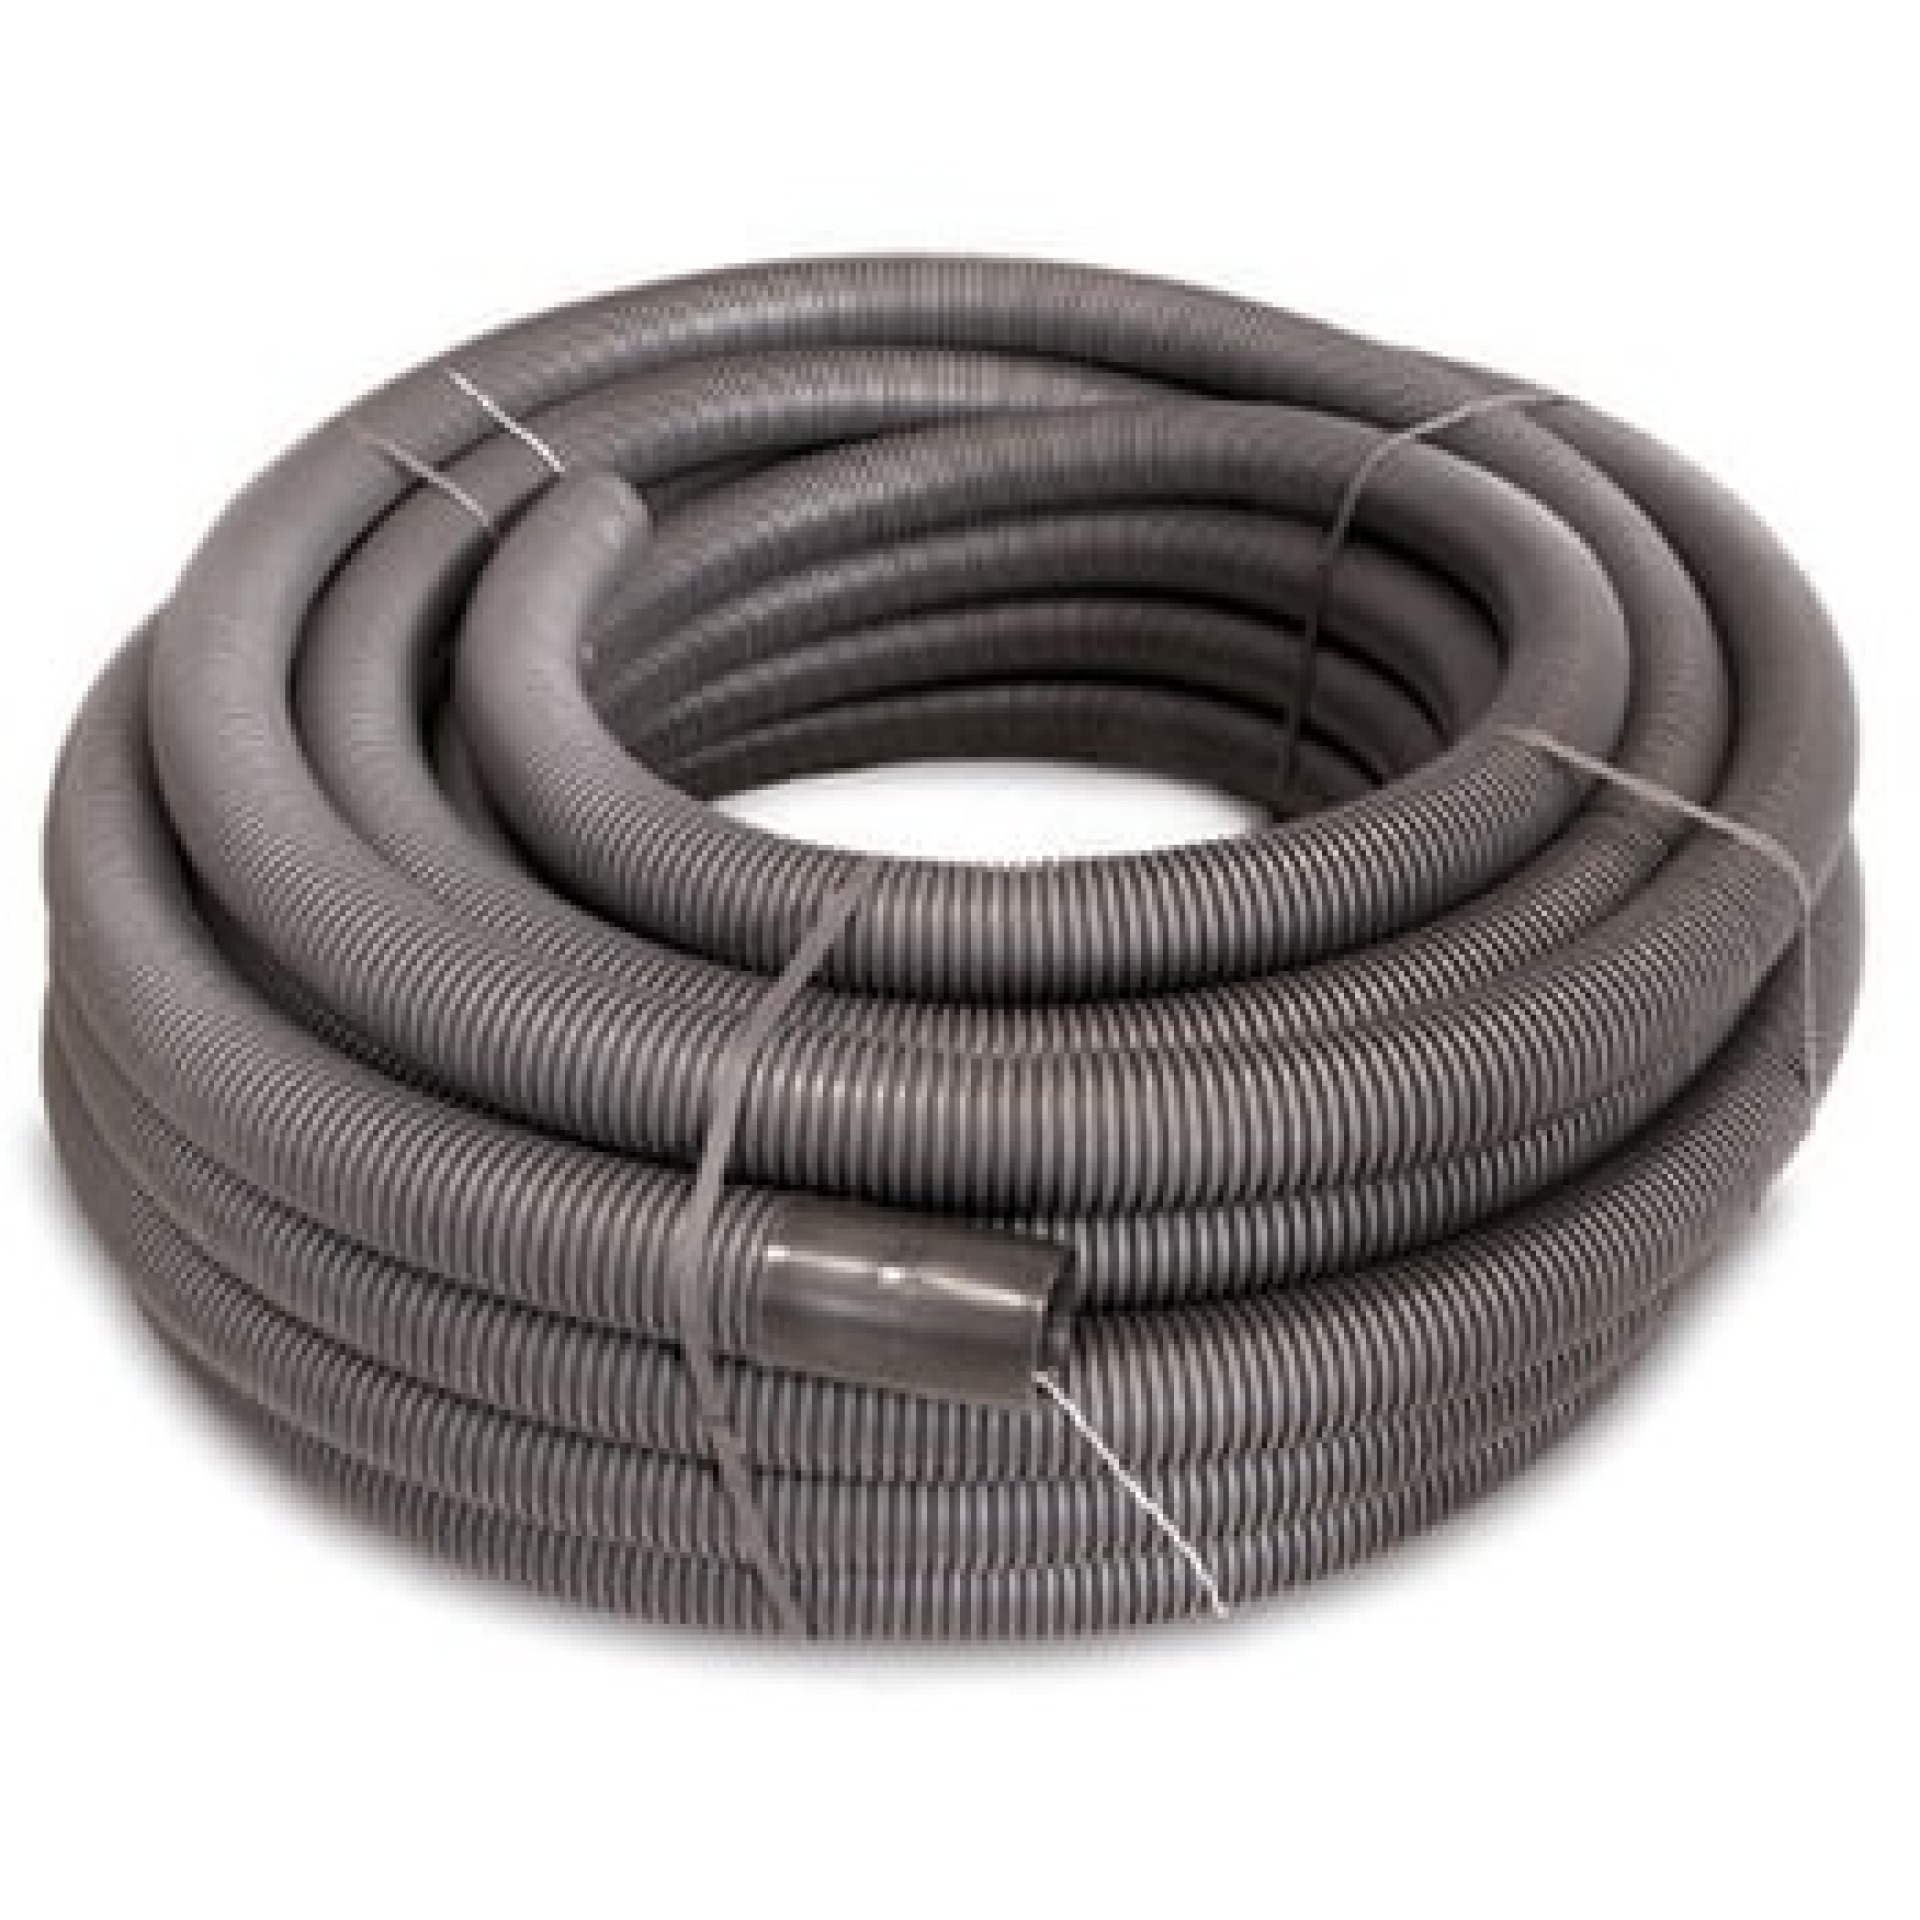 Flexible Conduit 90mm halogenfree, dobb wall, with draw-in wire black